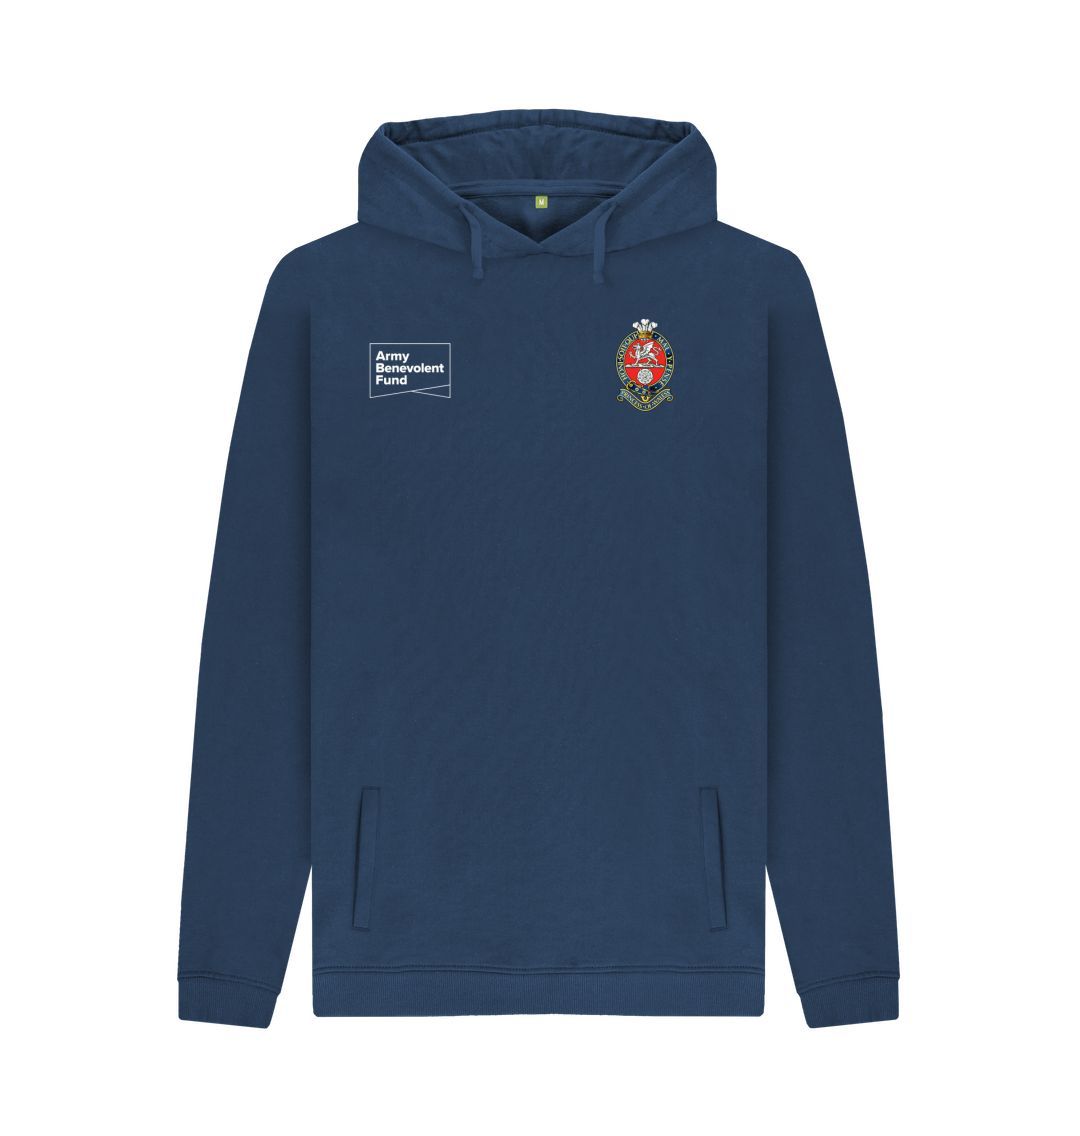 The Princess of Wales's Royal Regiment Unisex Hoodie - Army Benevolent Fund